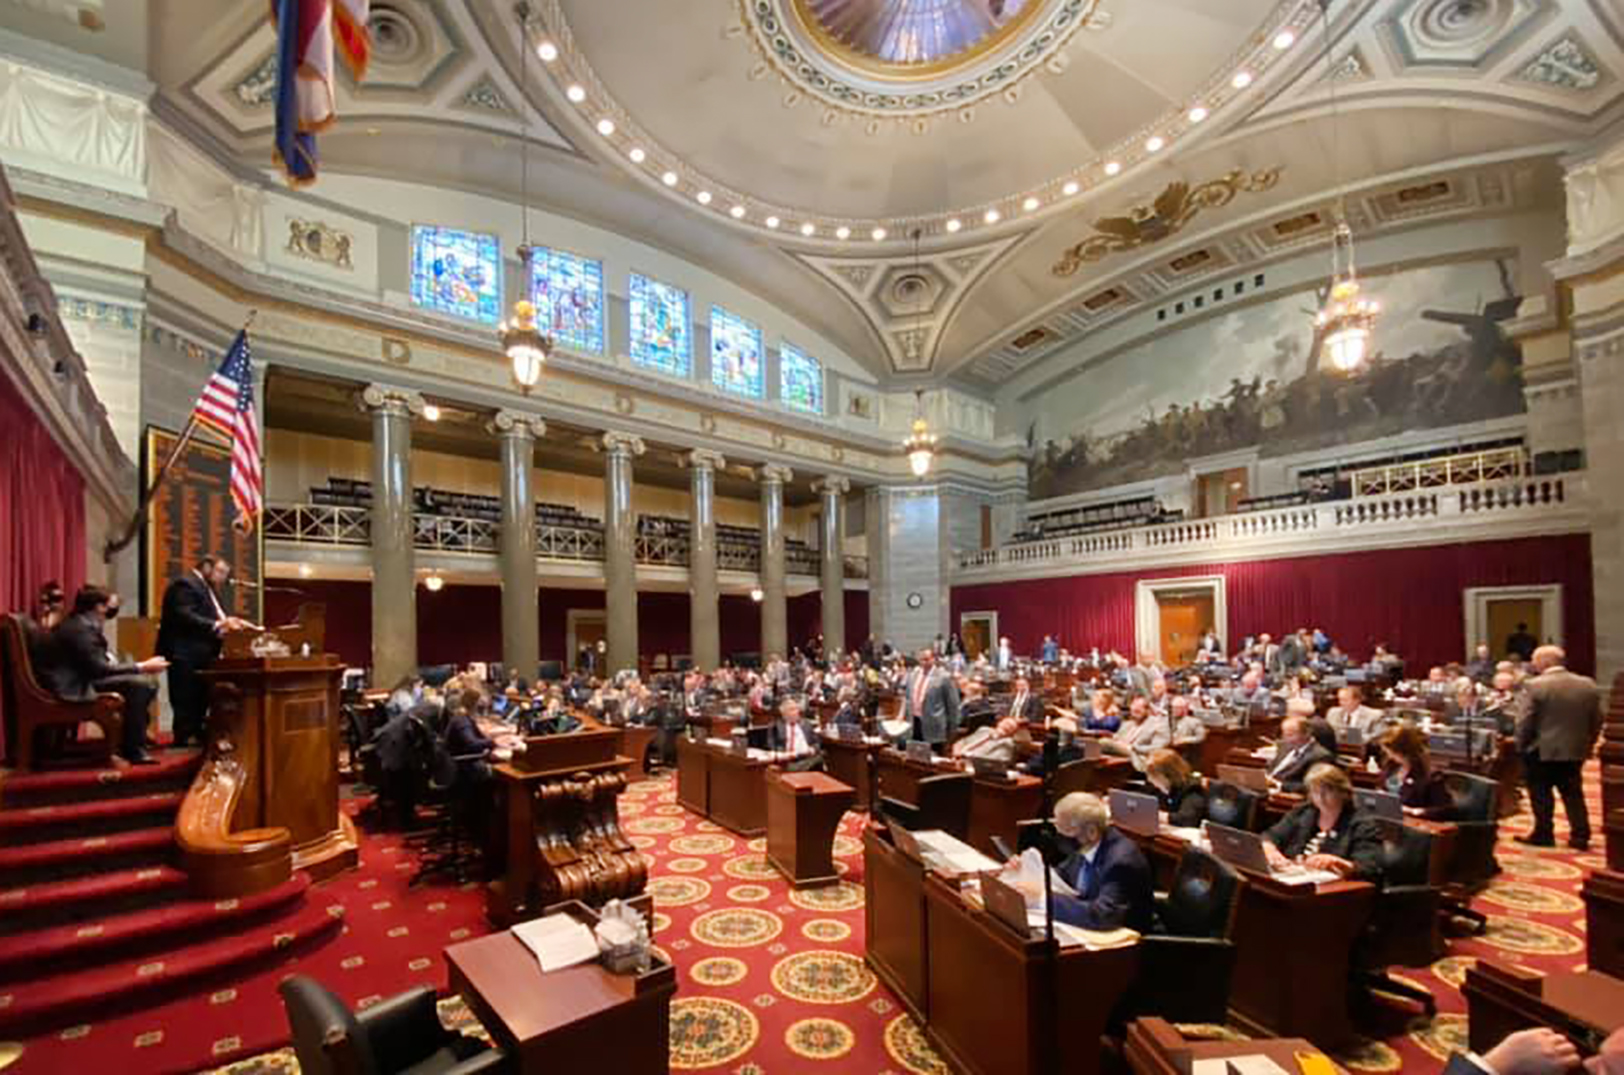 Missouri House advances pro-entrepreneur bill that would lower taxes on self-starters